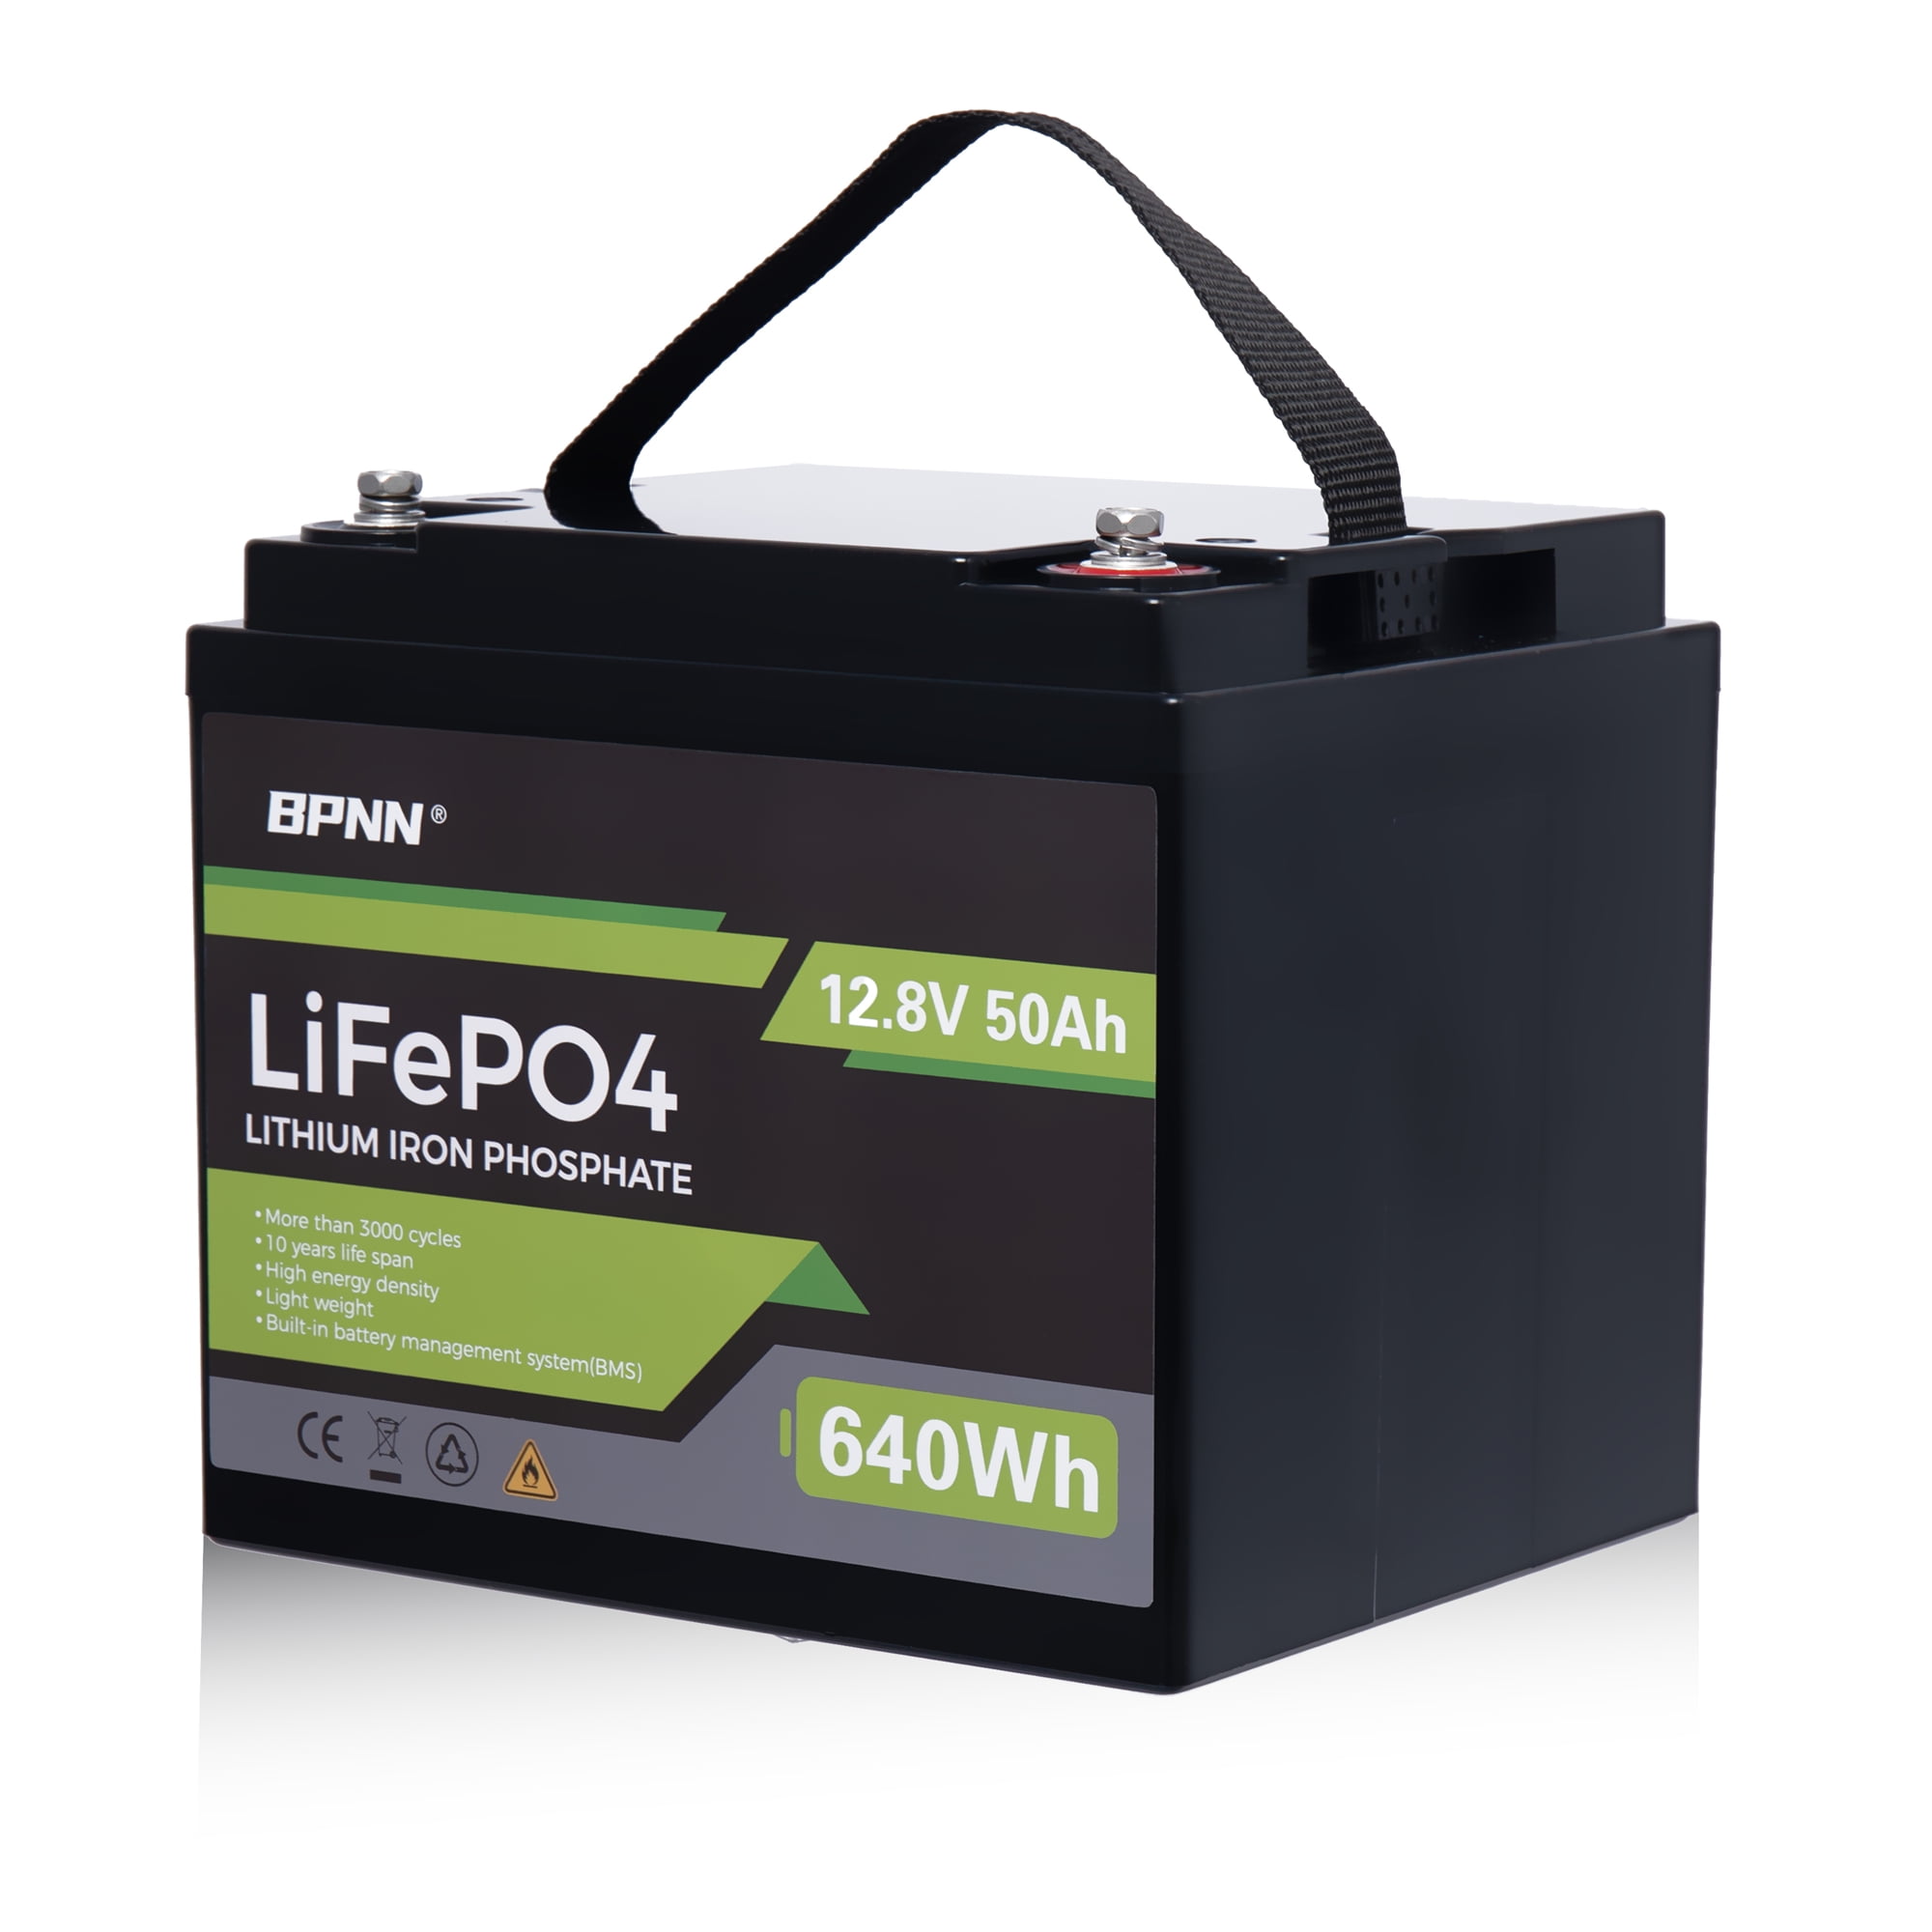 DC HOUSE 12V 12Ah LiFePO4 Lithium Battery with 15A BMS, 10 Year Lifespan,  Up to 15000+ Cycles, Lightweight and Portable for RV, Trolling Motor,  Energy